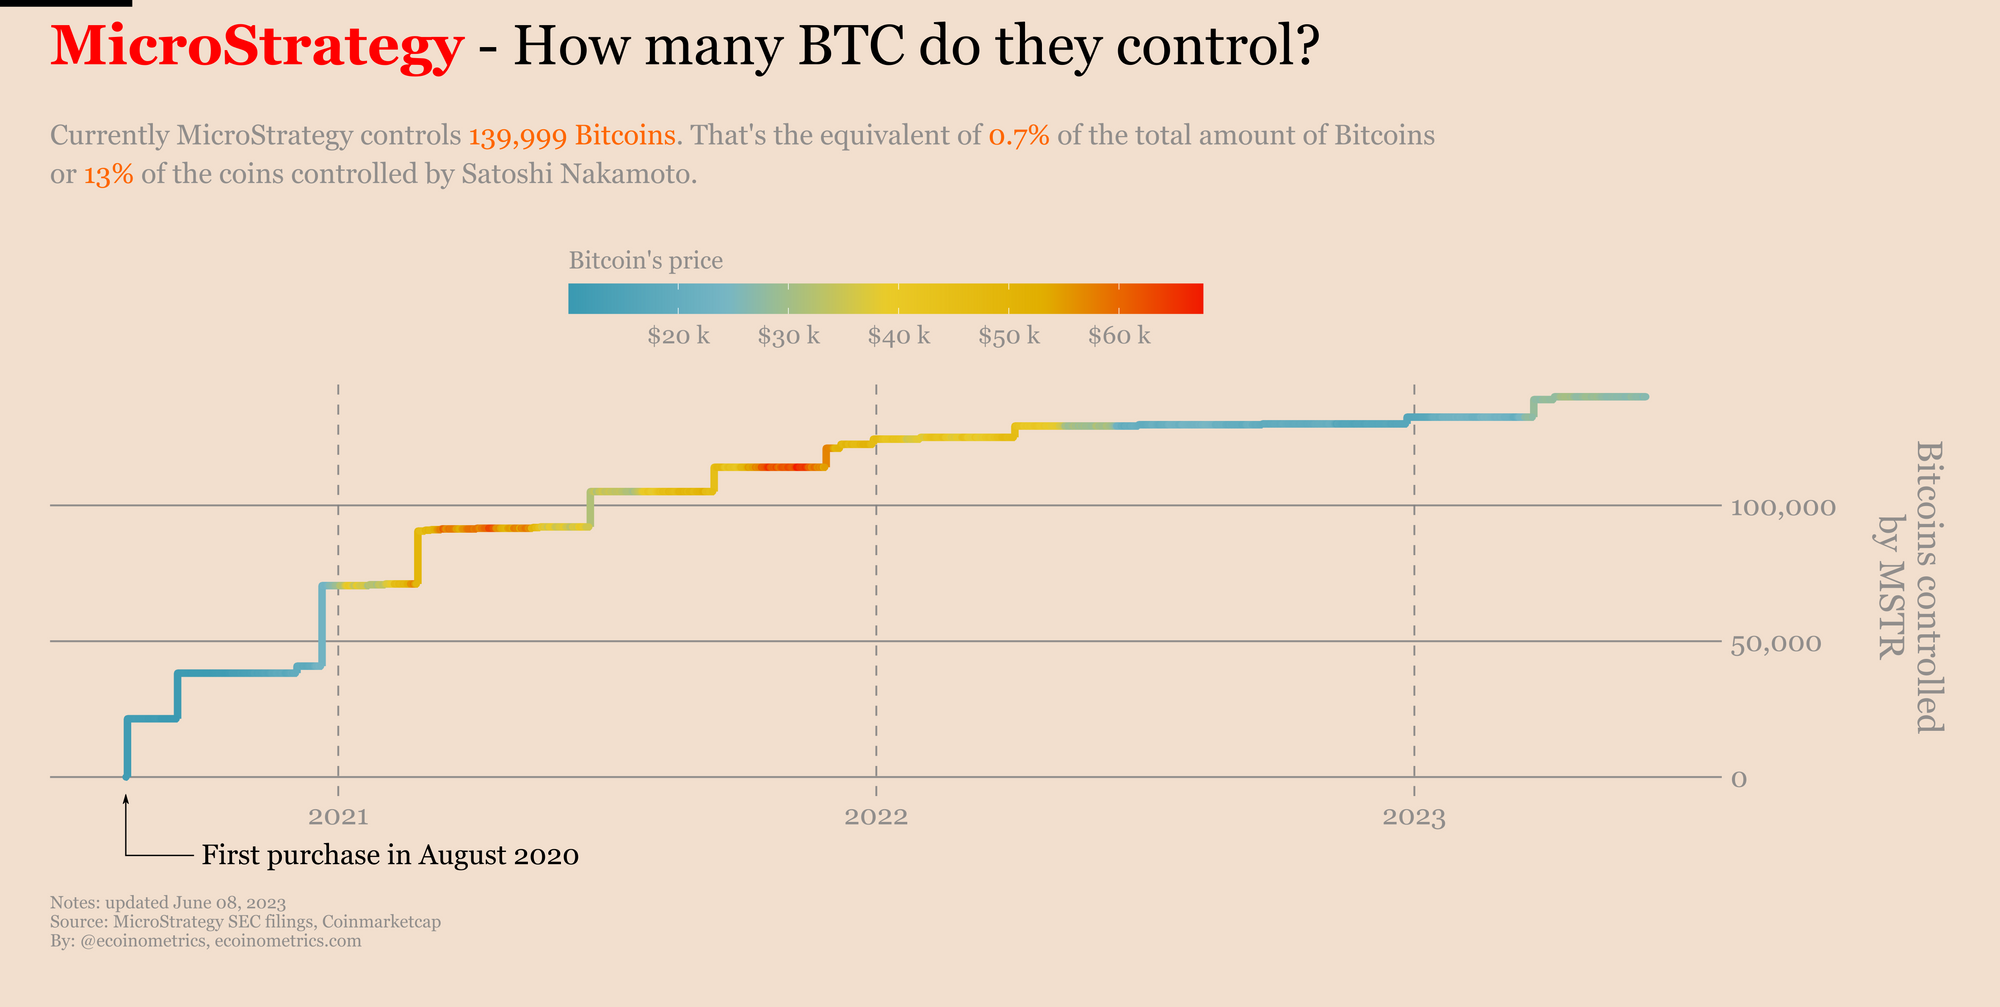 How many Bitcoins does MicroStrategy control?